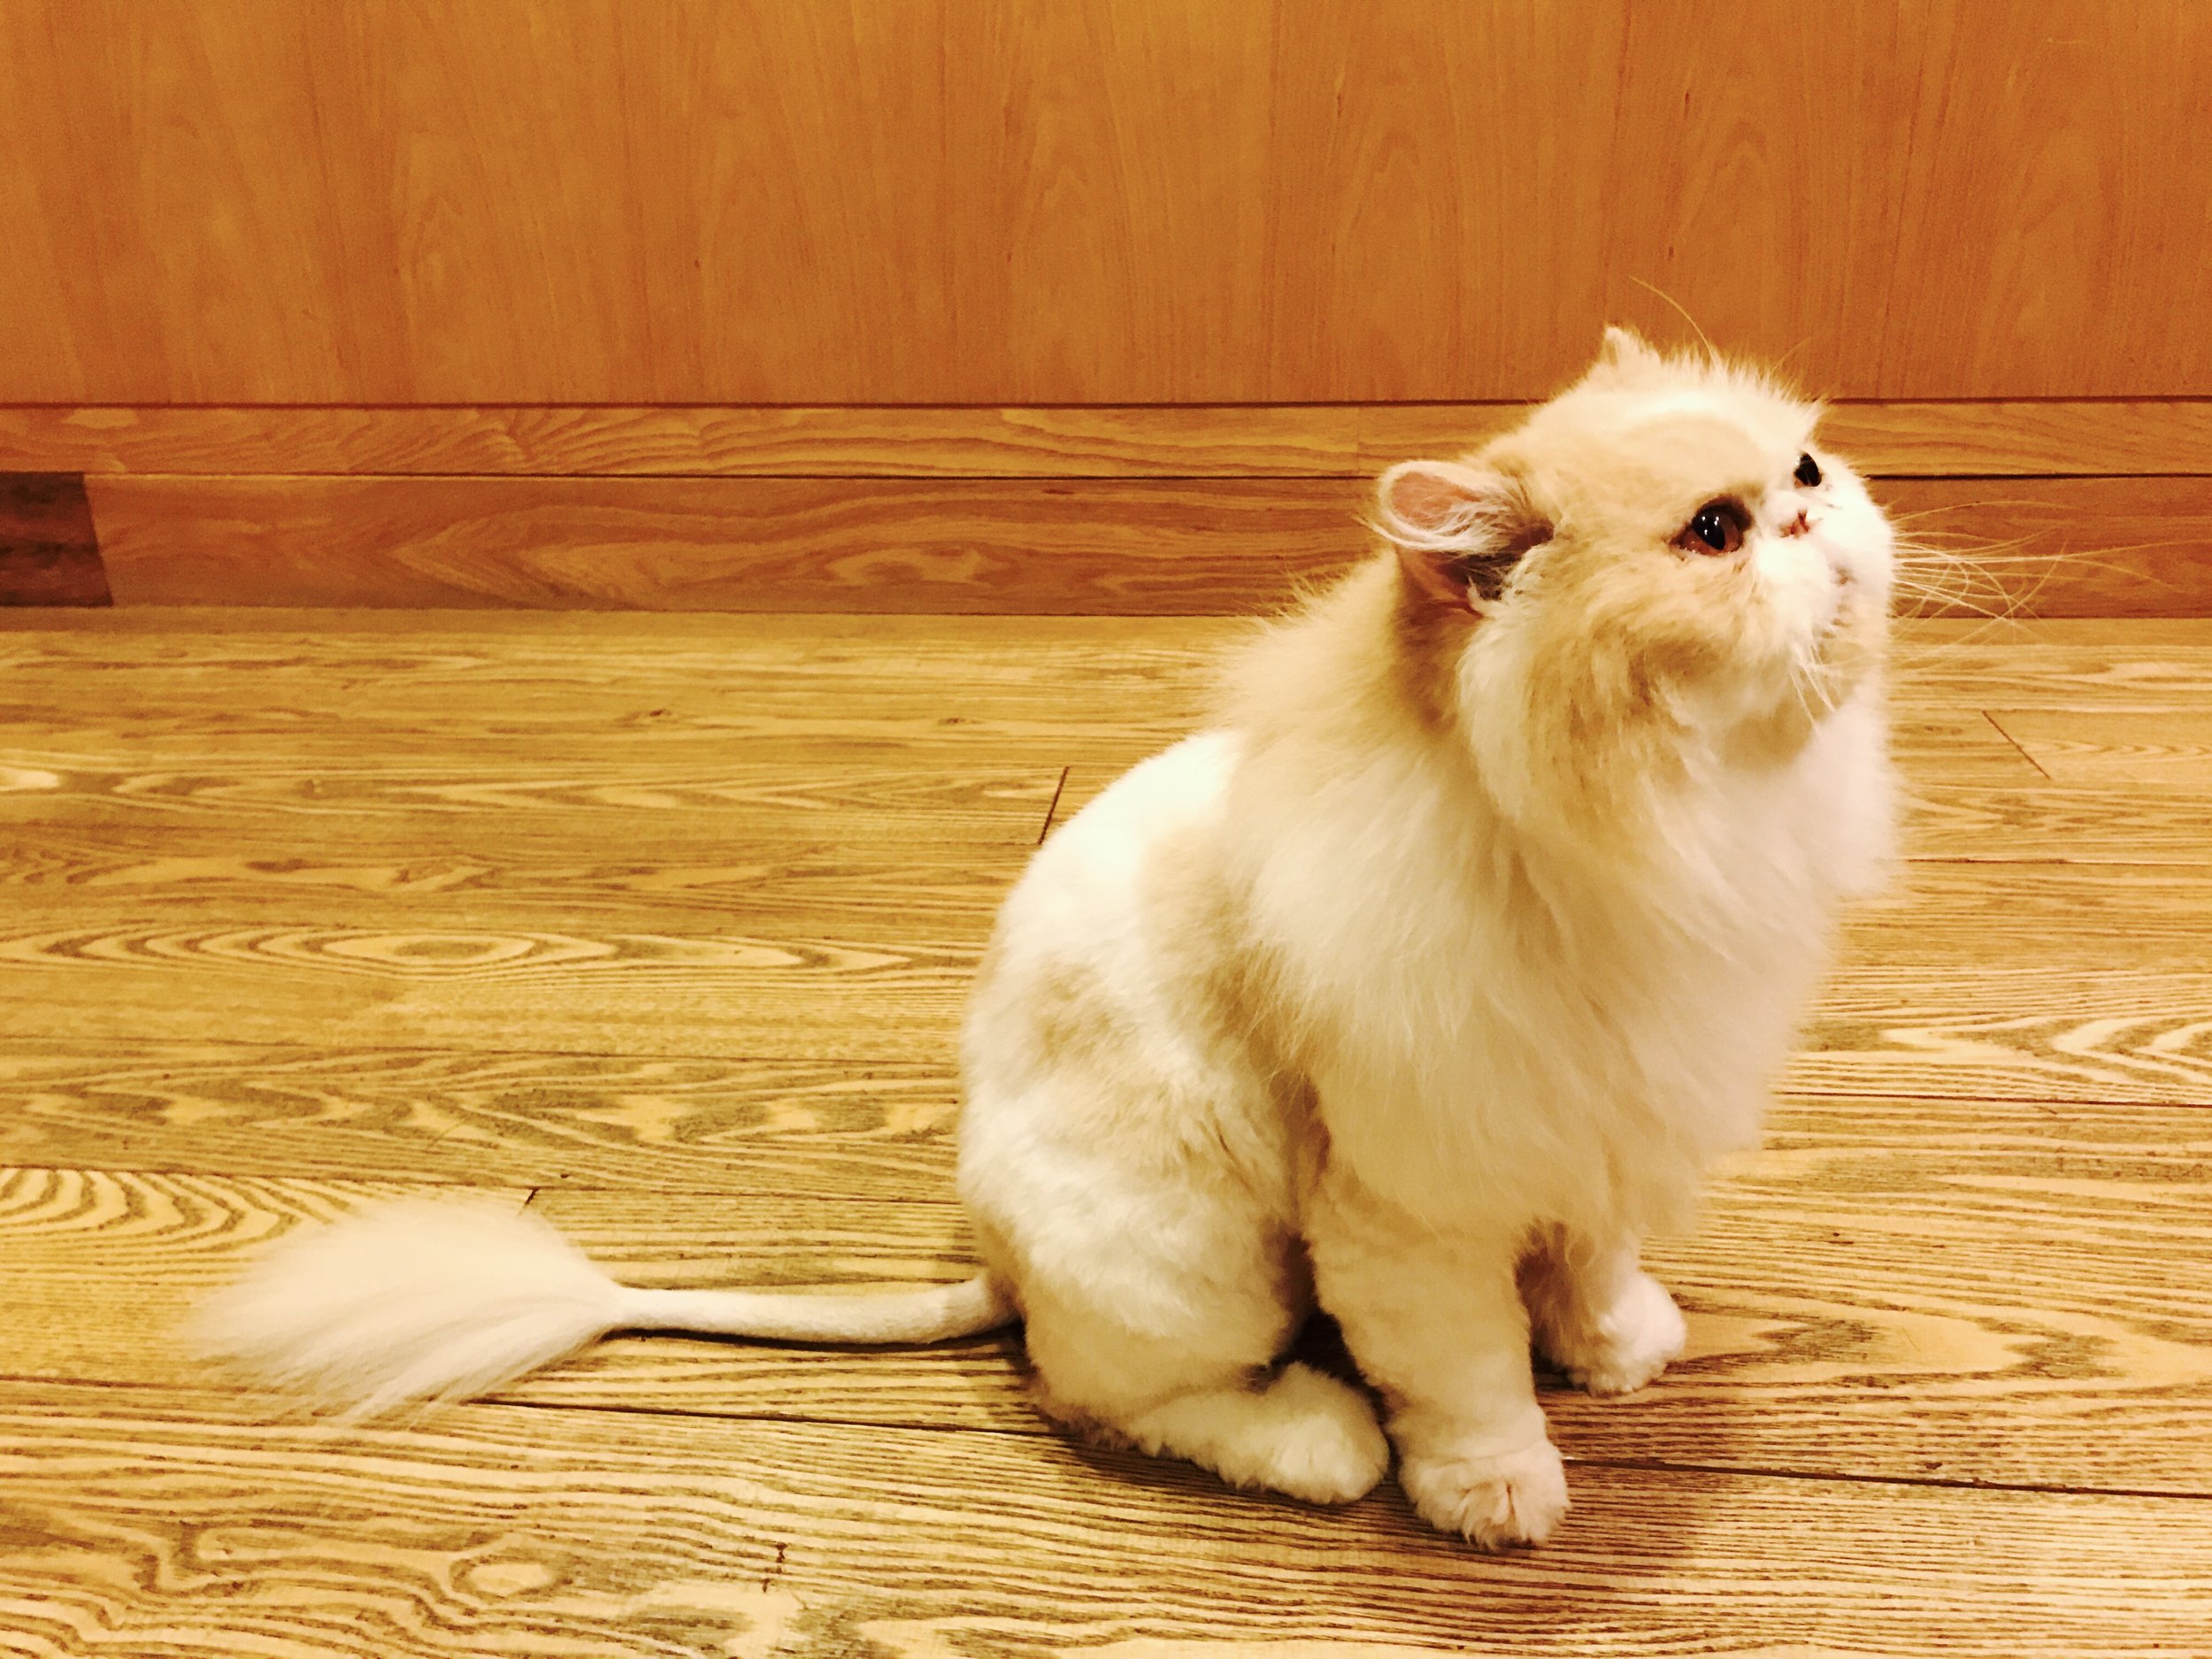 There are 18 adorable cats in residence at Neko no Jikan Amemura